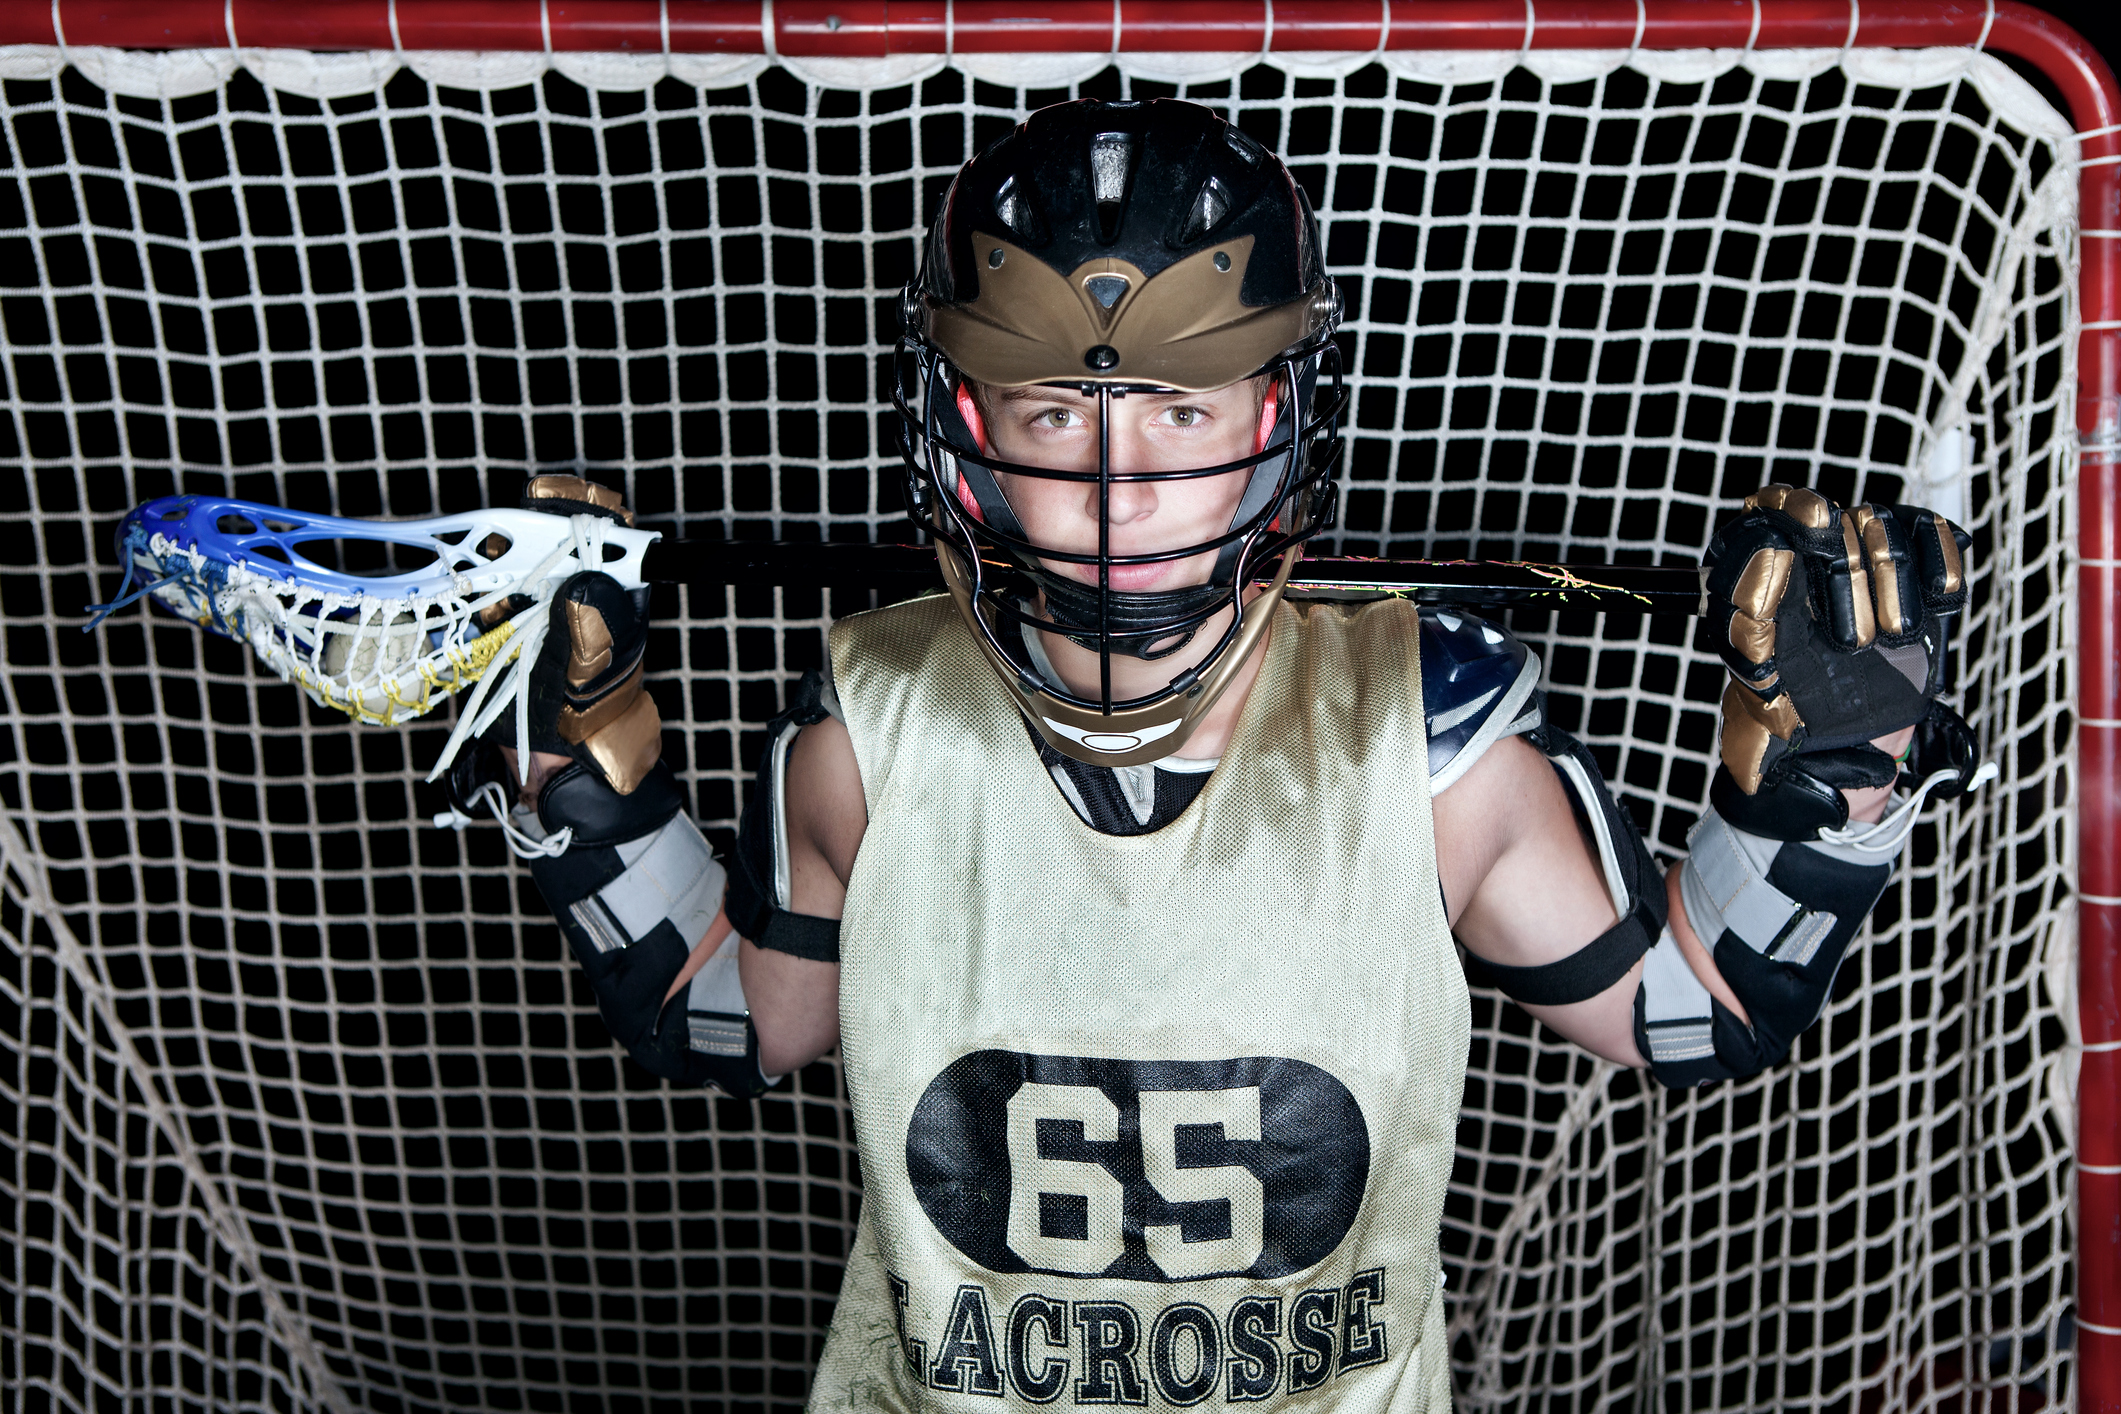 Lacrosse player dressed in uniform, holding a stick.